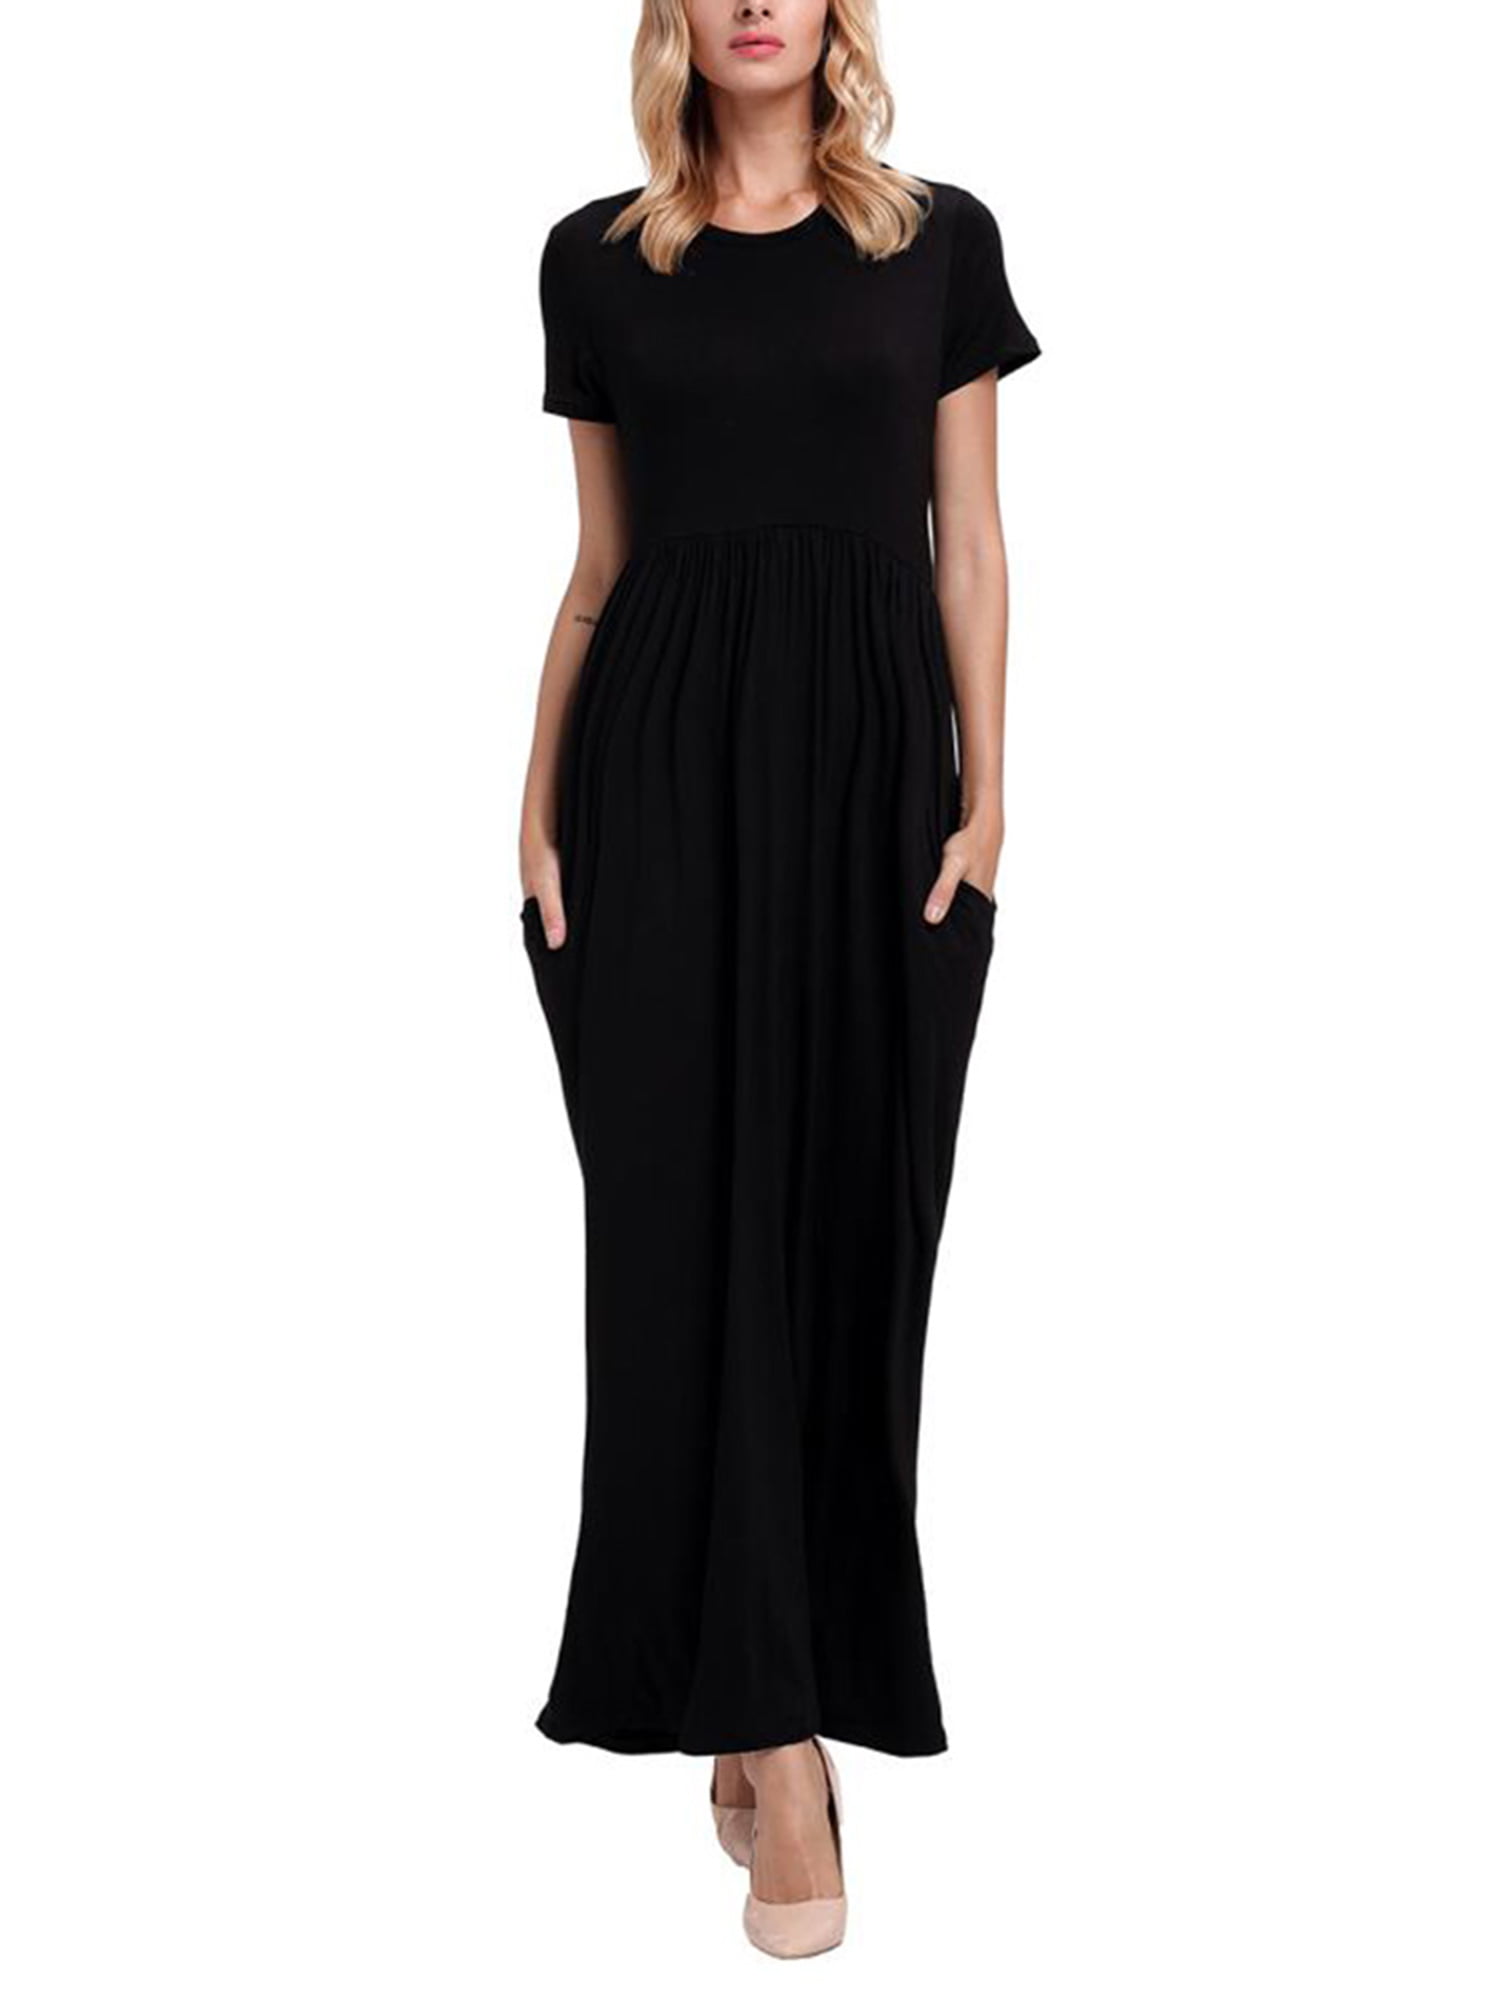 Money down images of maxi dresses with sleeves uae best places